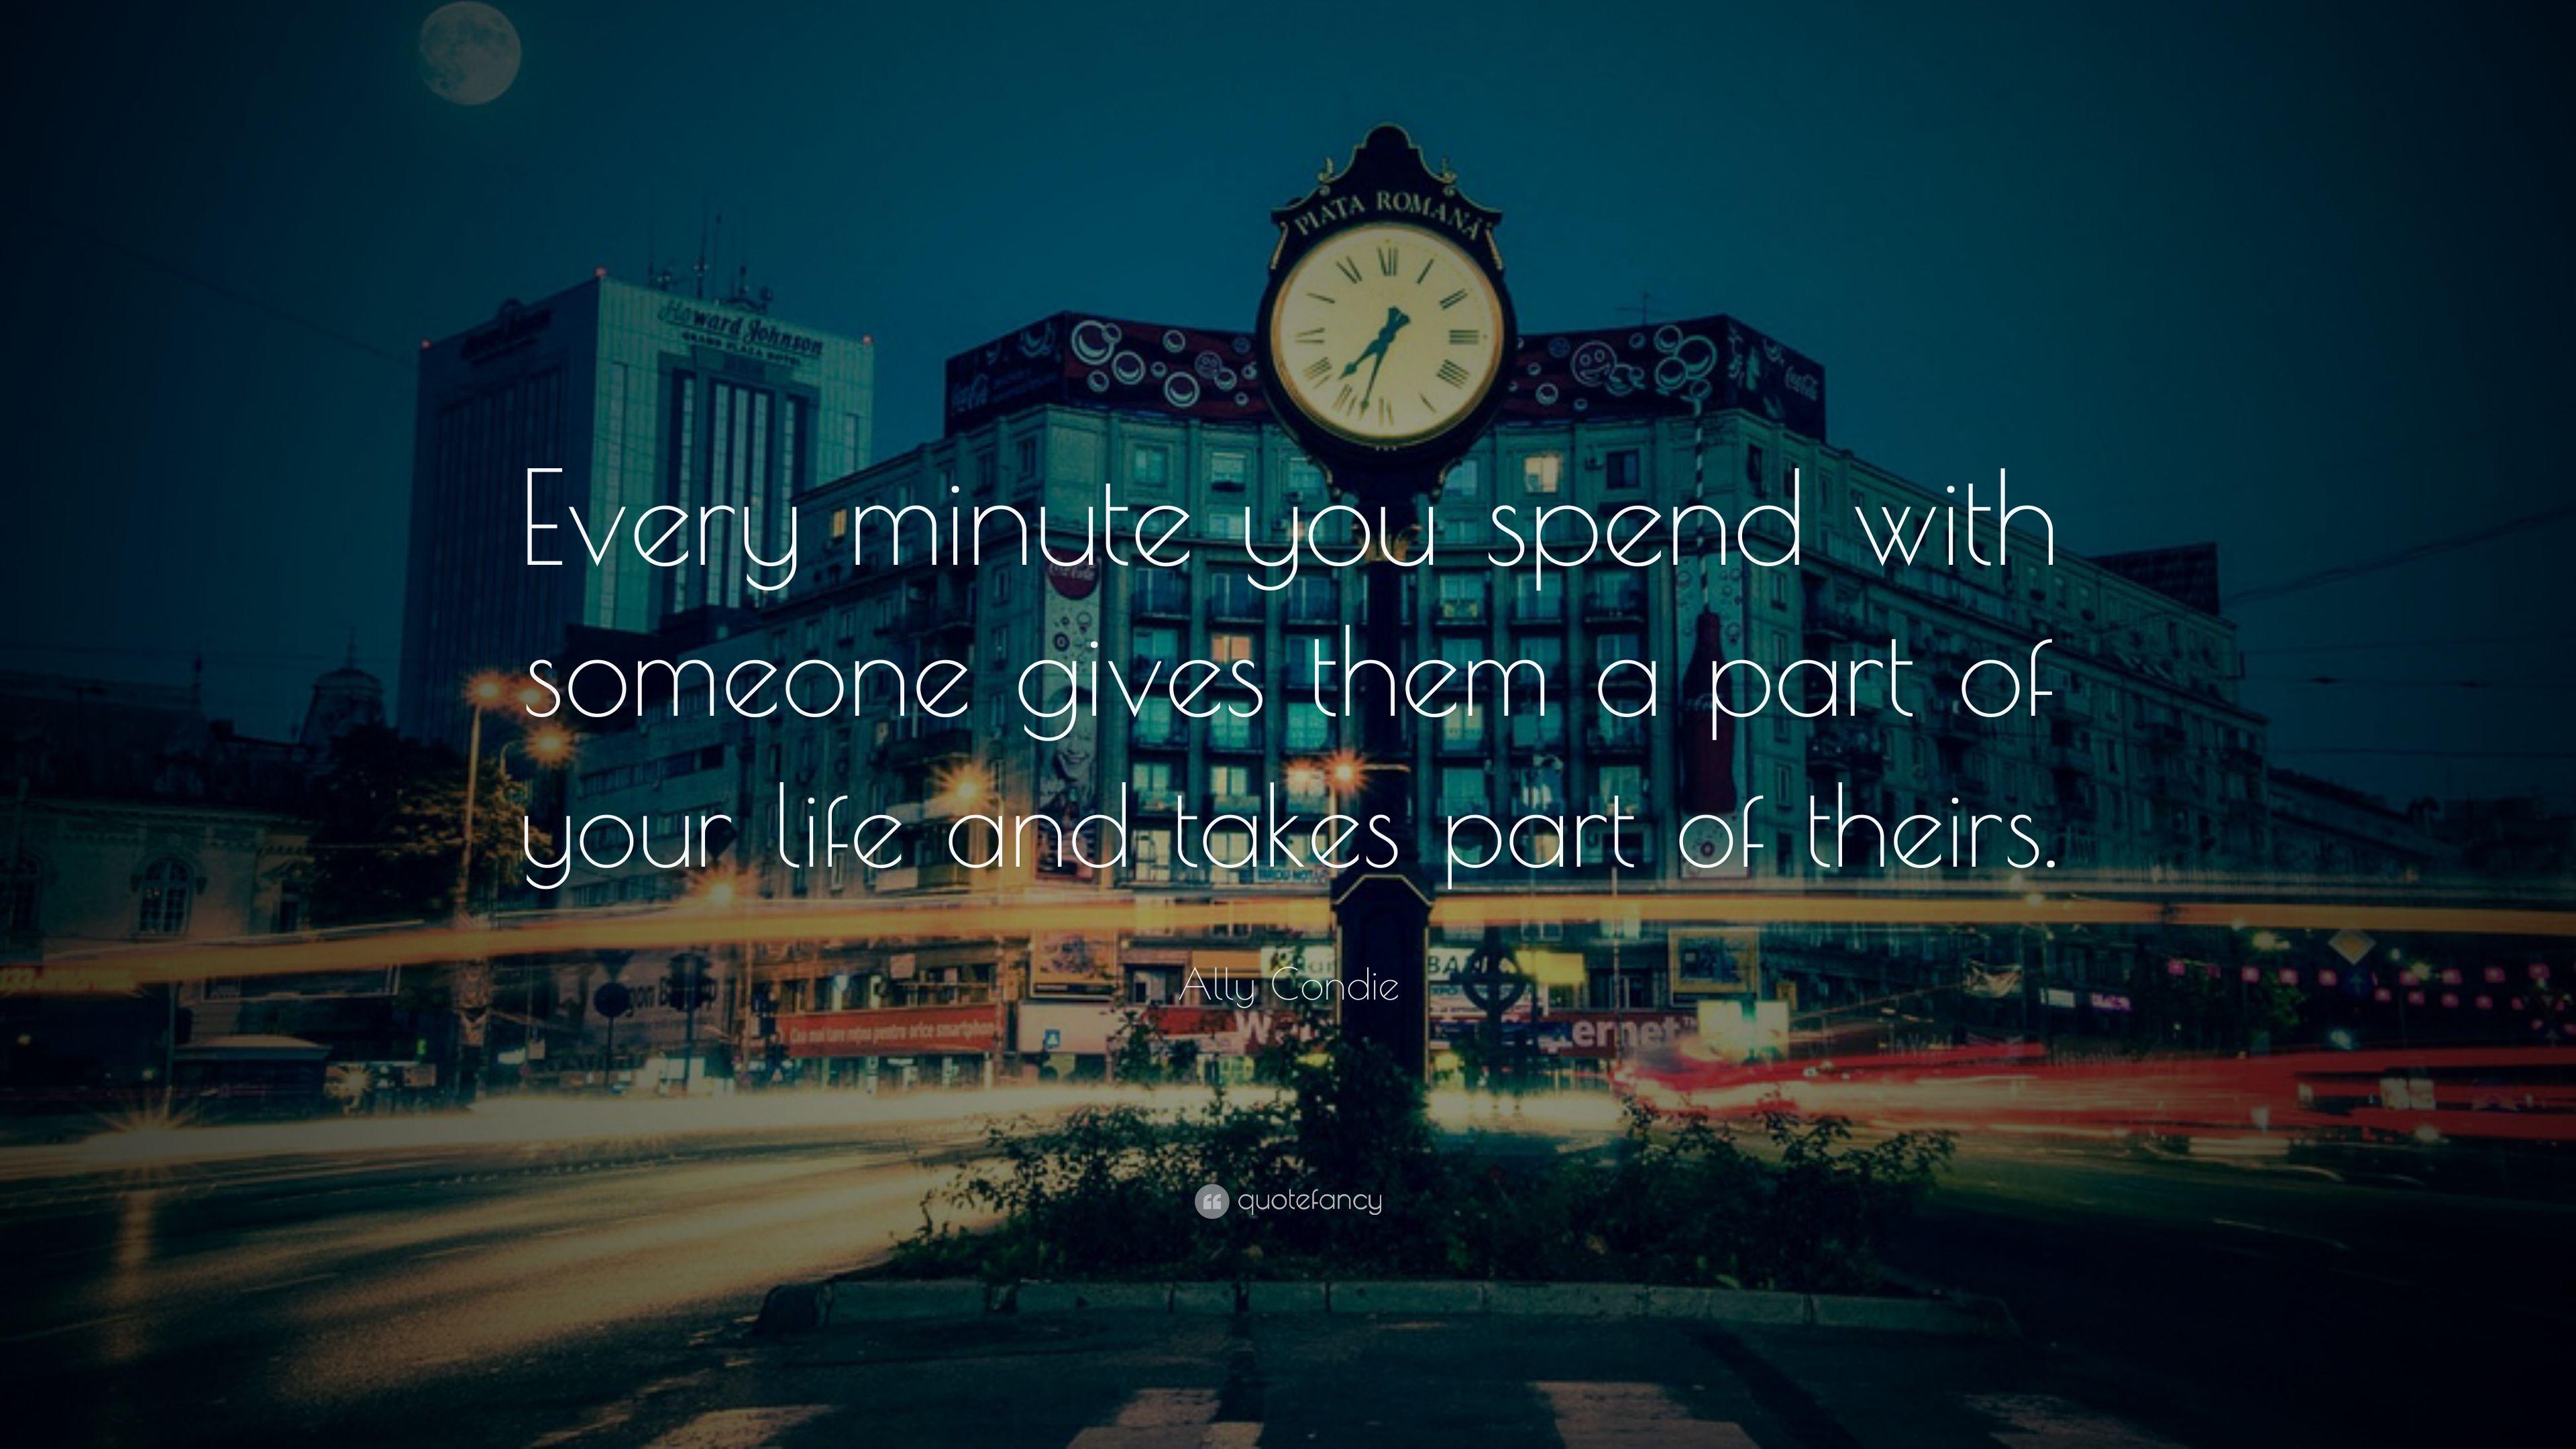 Ally Condie Quote: “Every minute you spend with someone gives them a